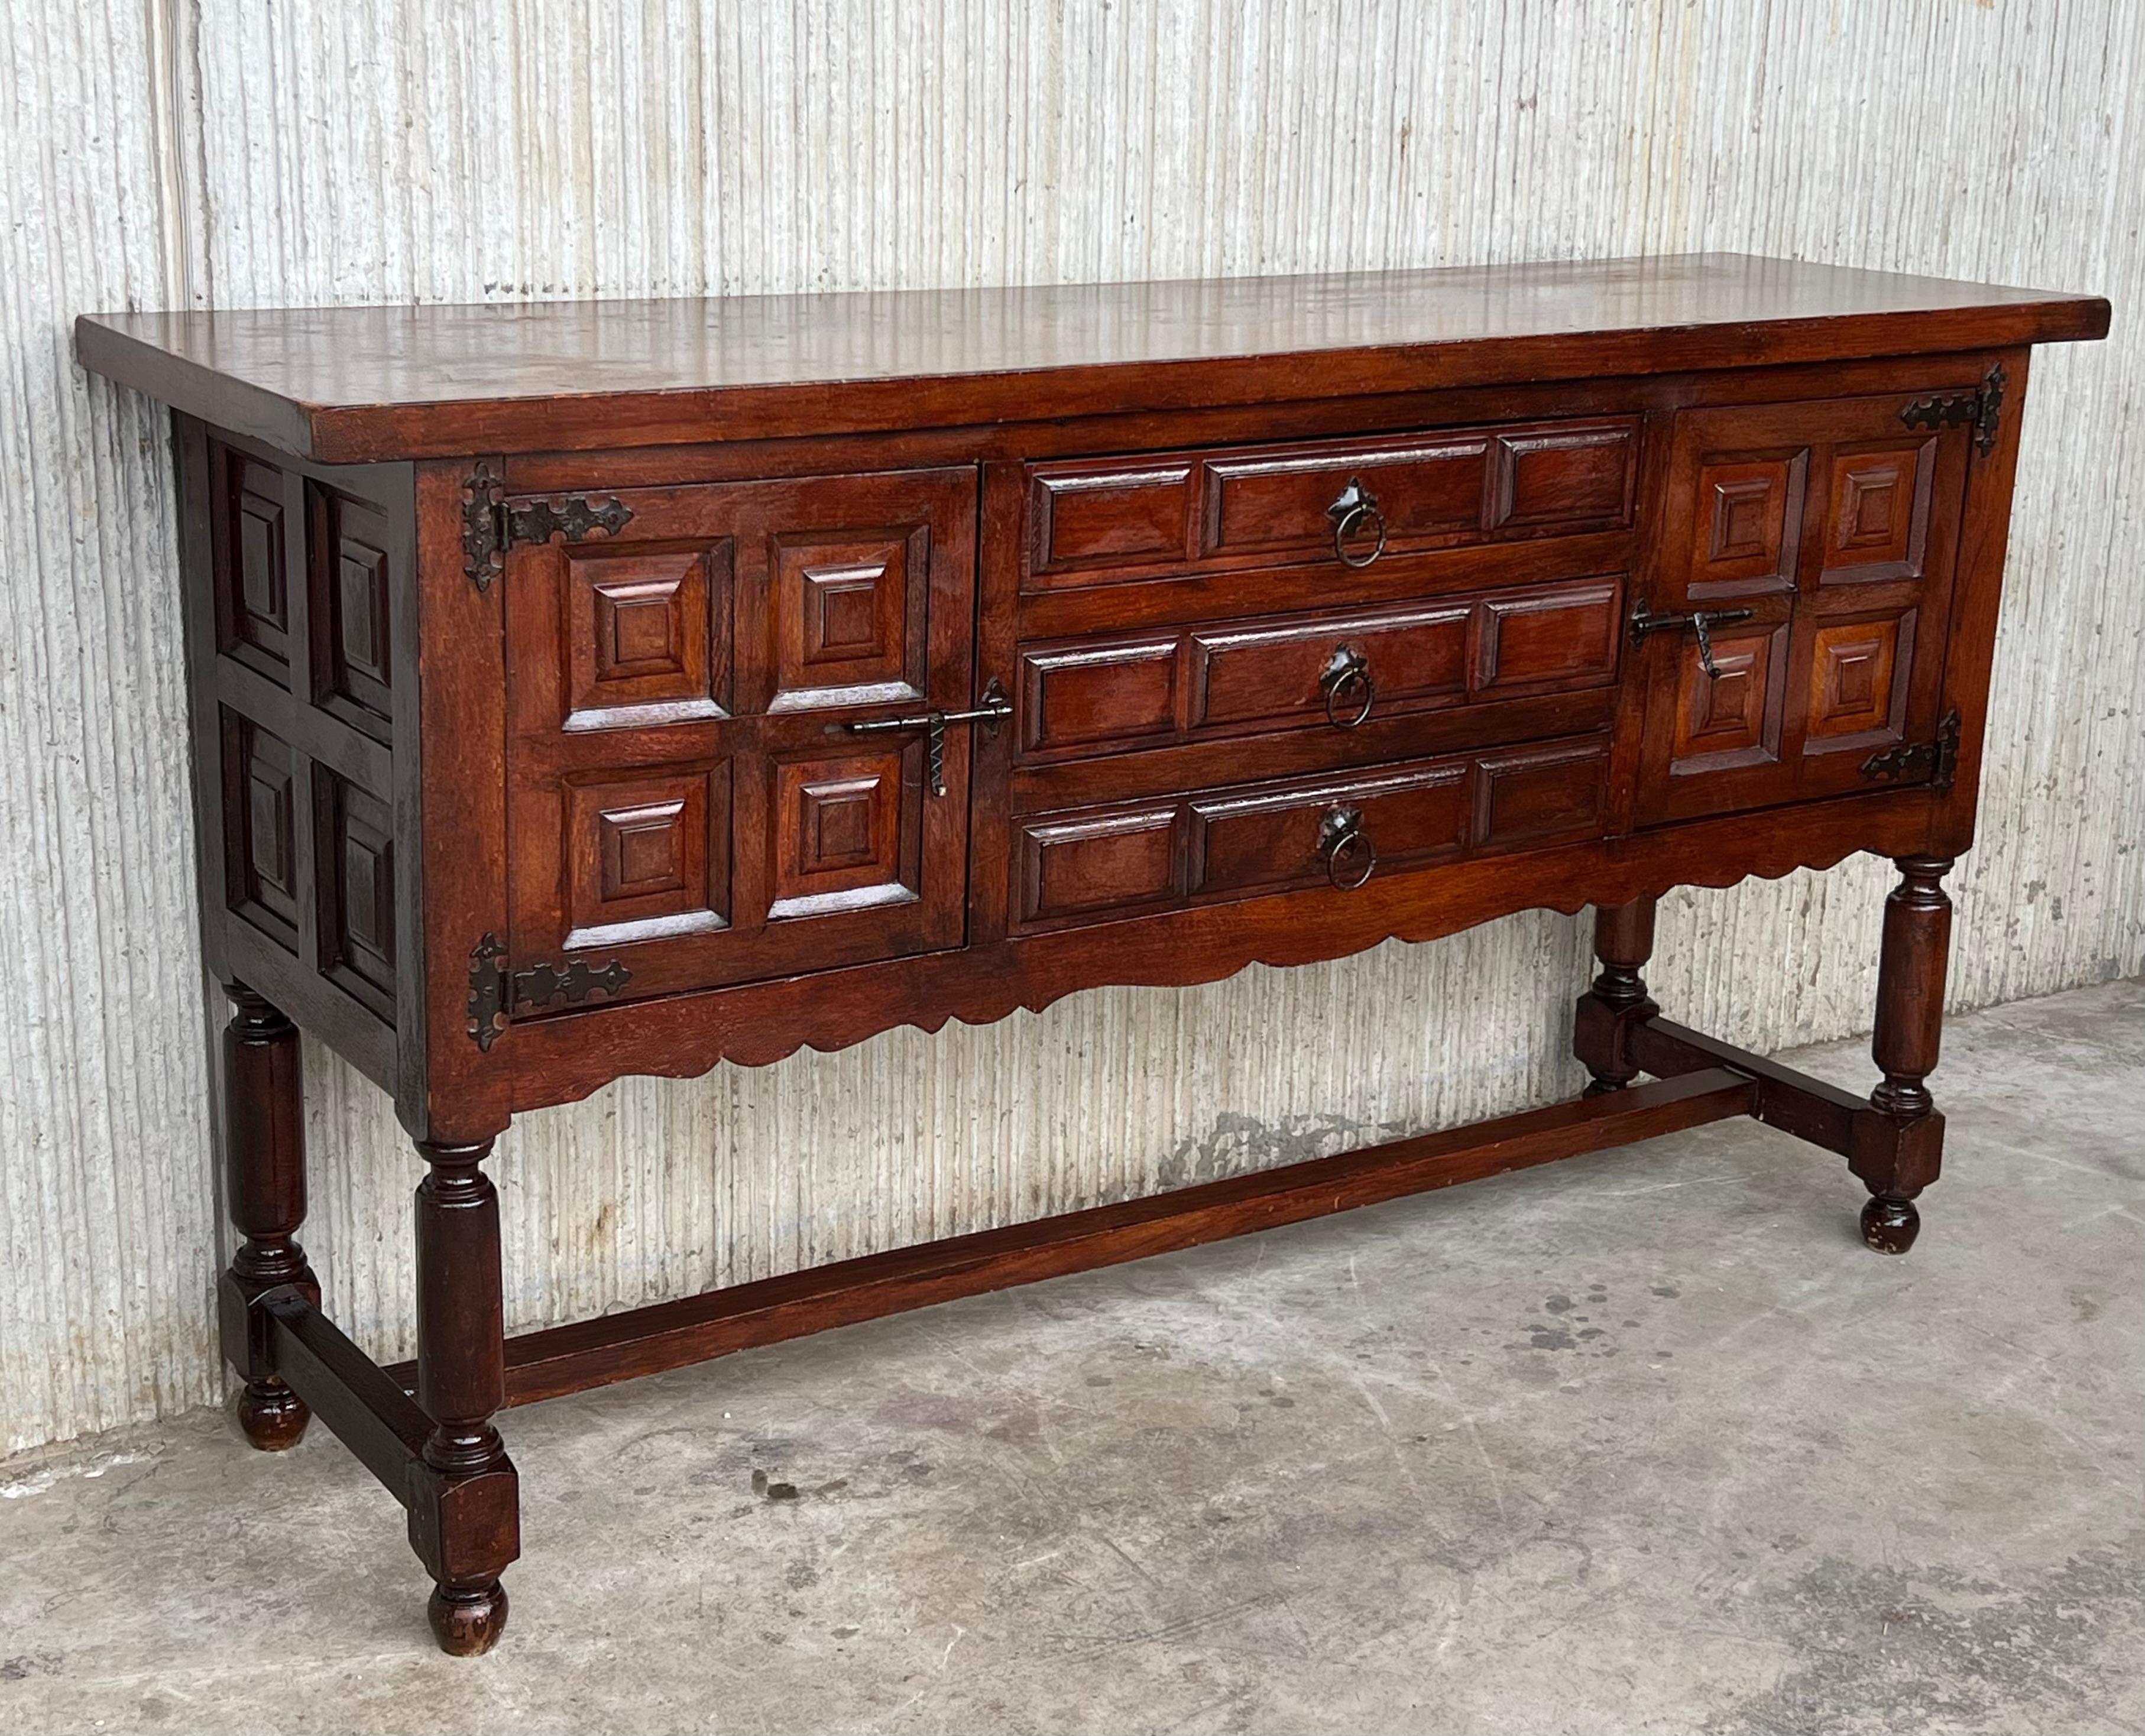 Spanish Colonial Spanish Buffet with Two Doors and Three Drawers with Original Hardware For Sale